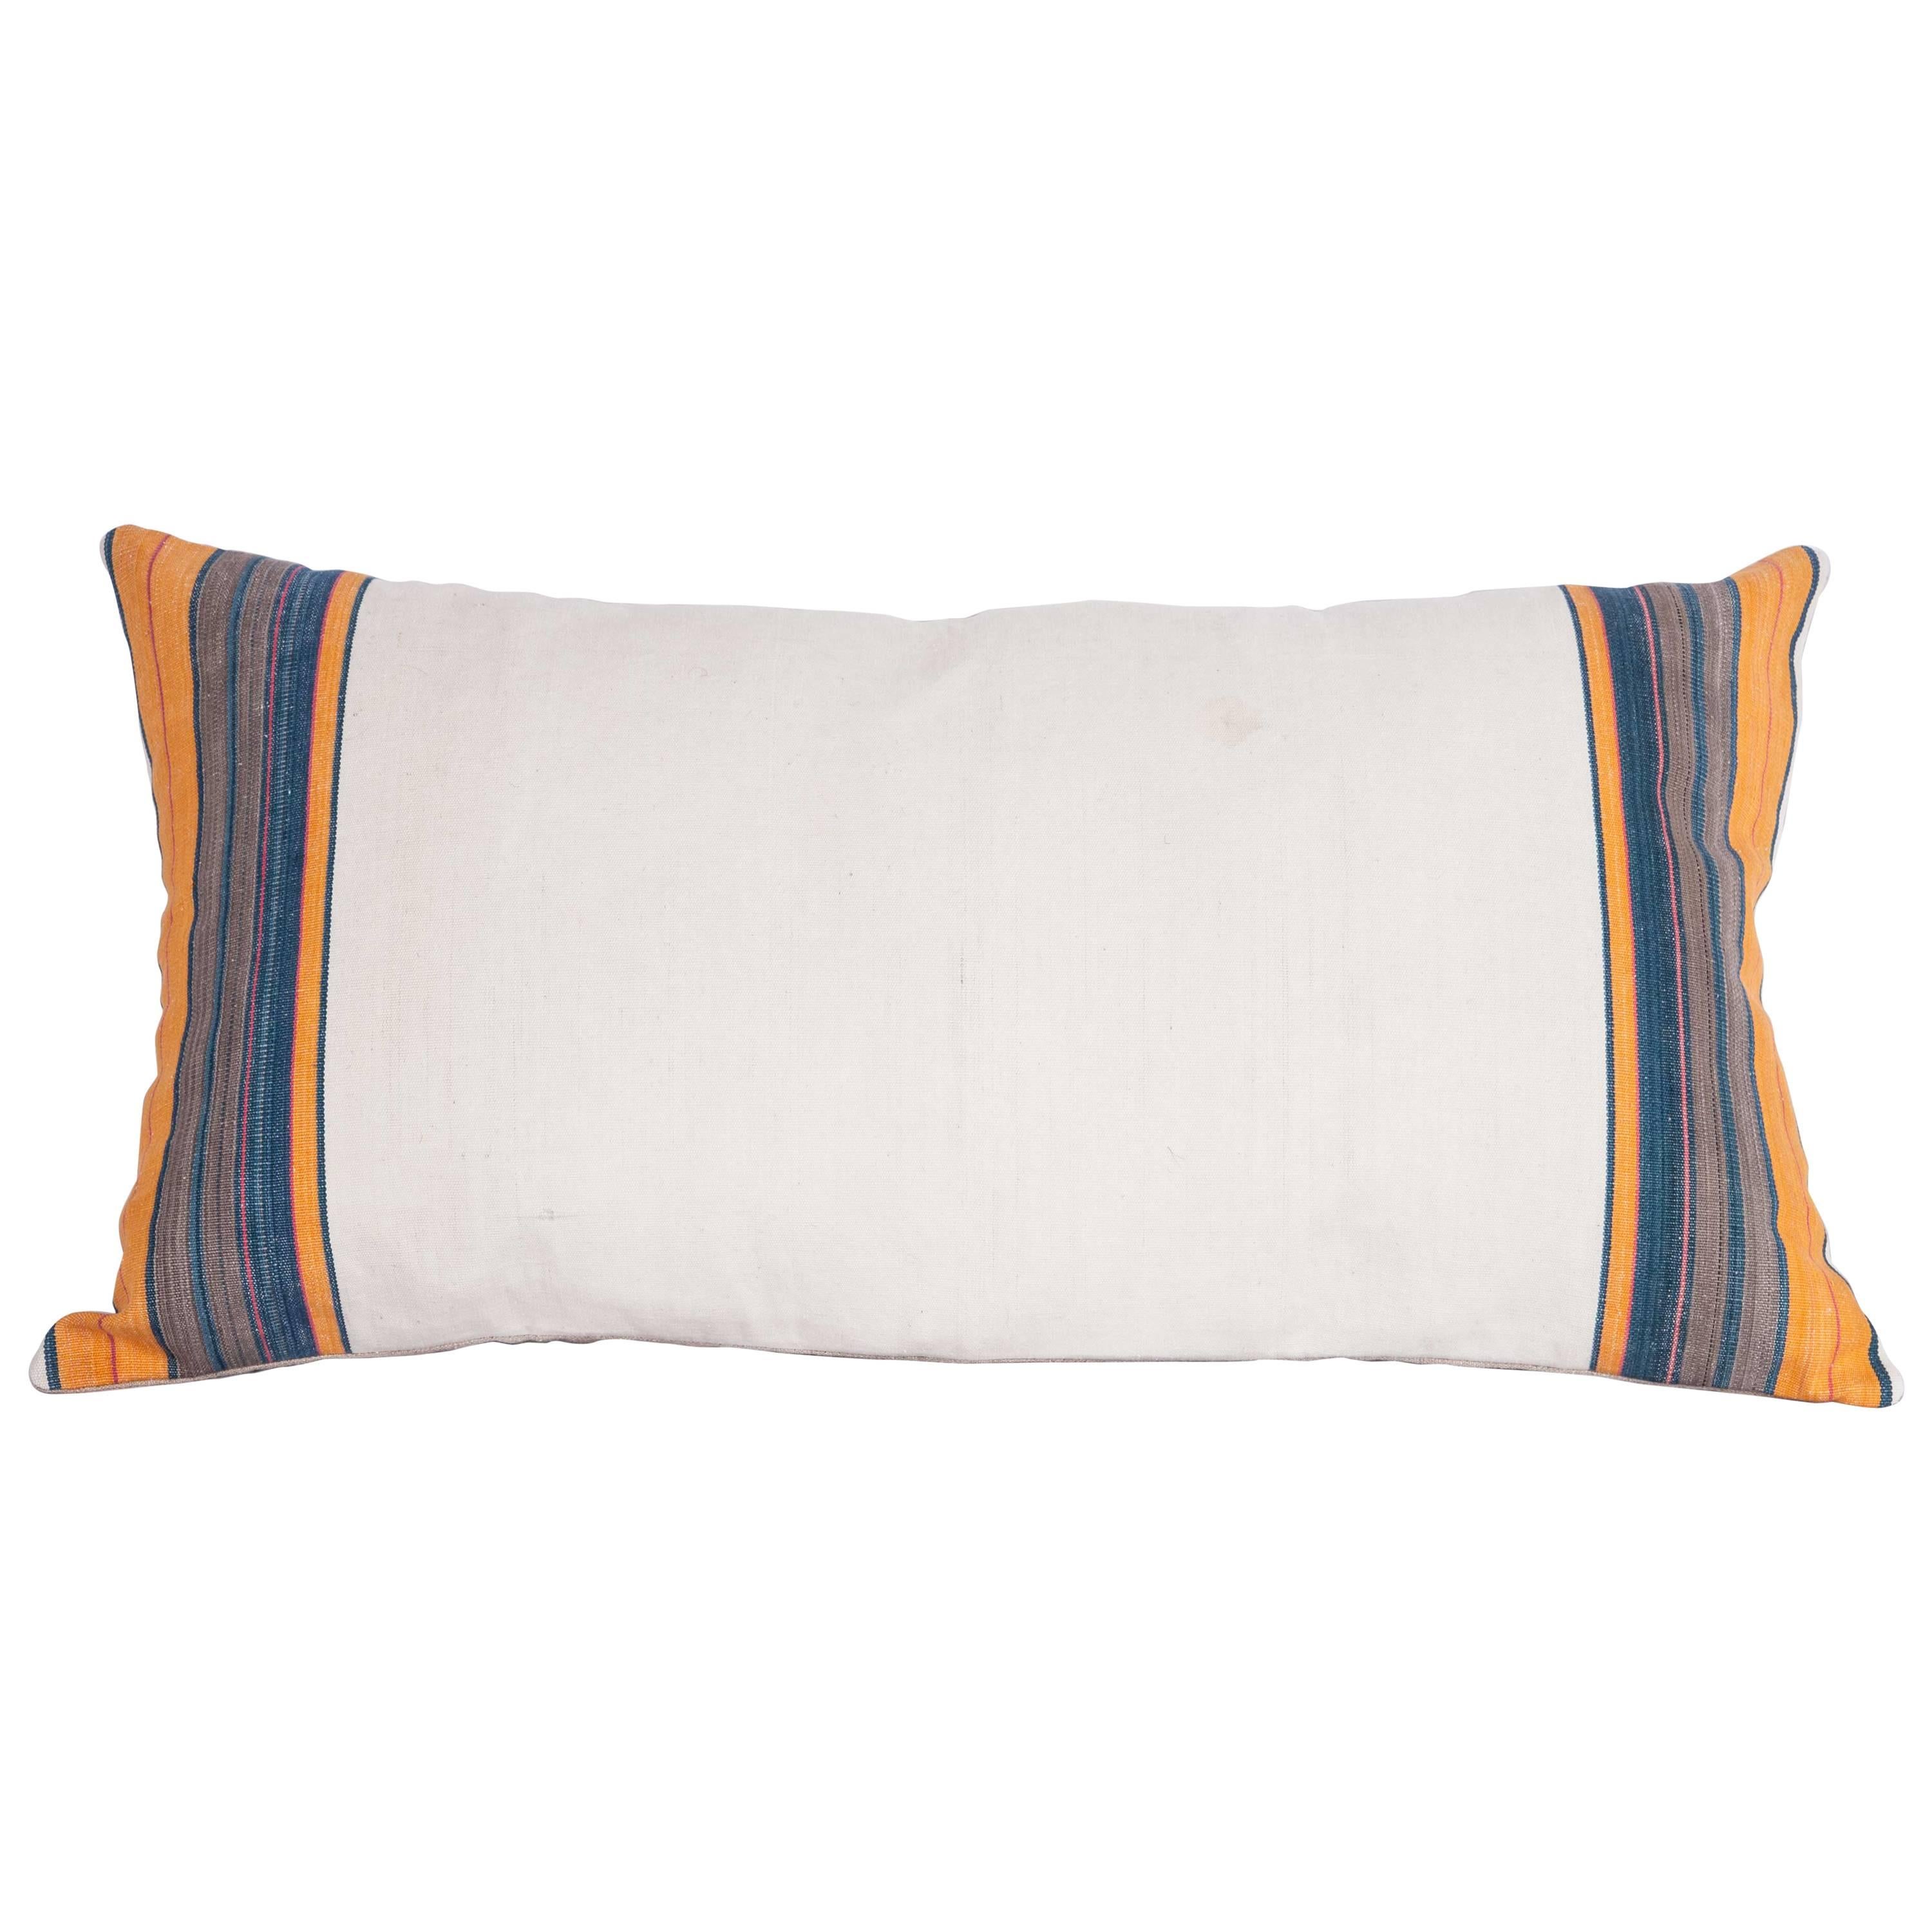 Mid-20th Century Pillow Made Out of a Cotton Flat-Weave For Sale